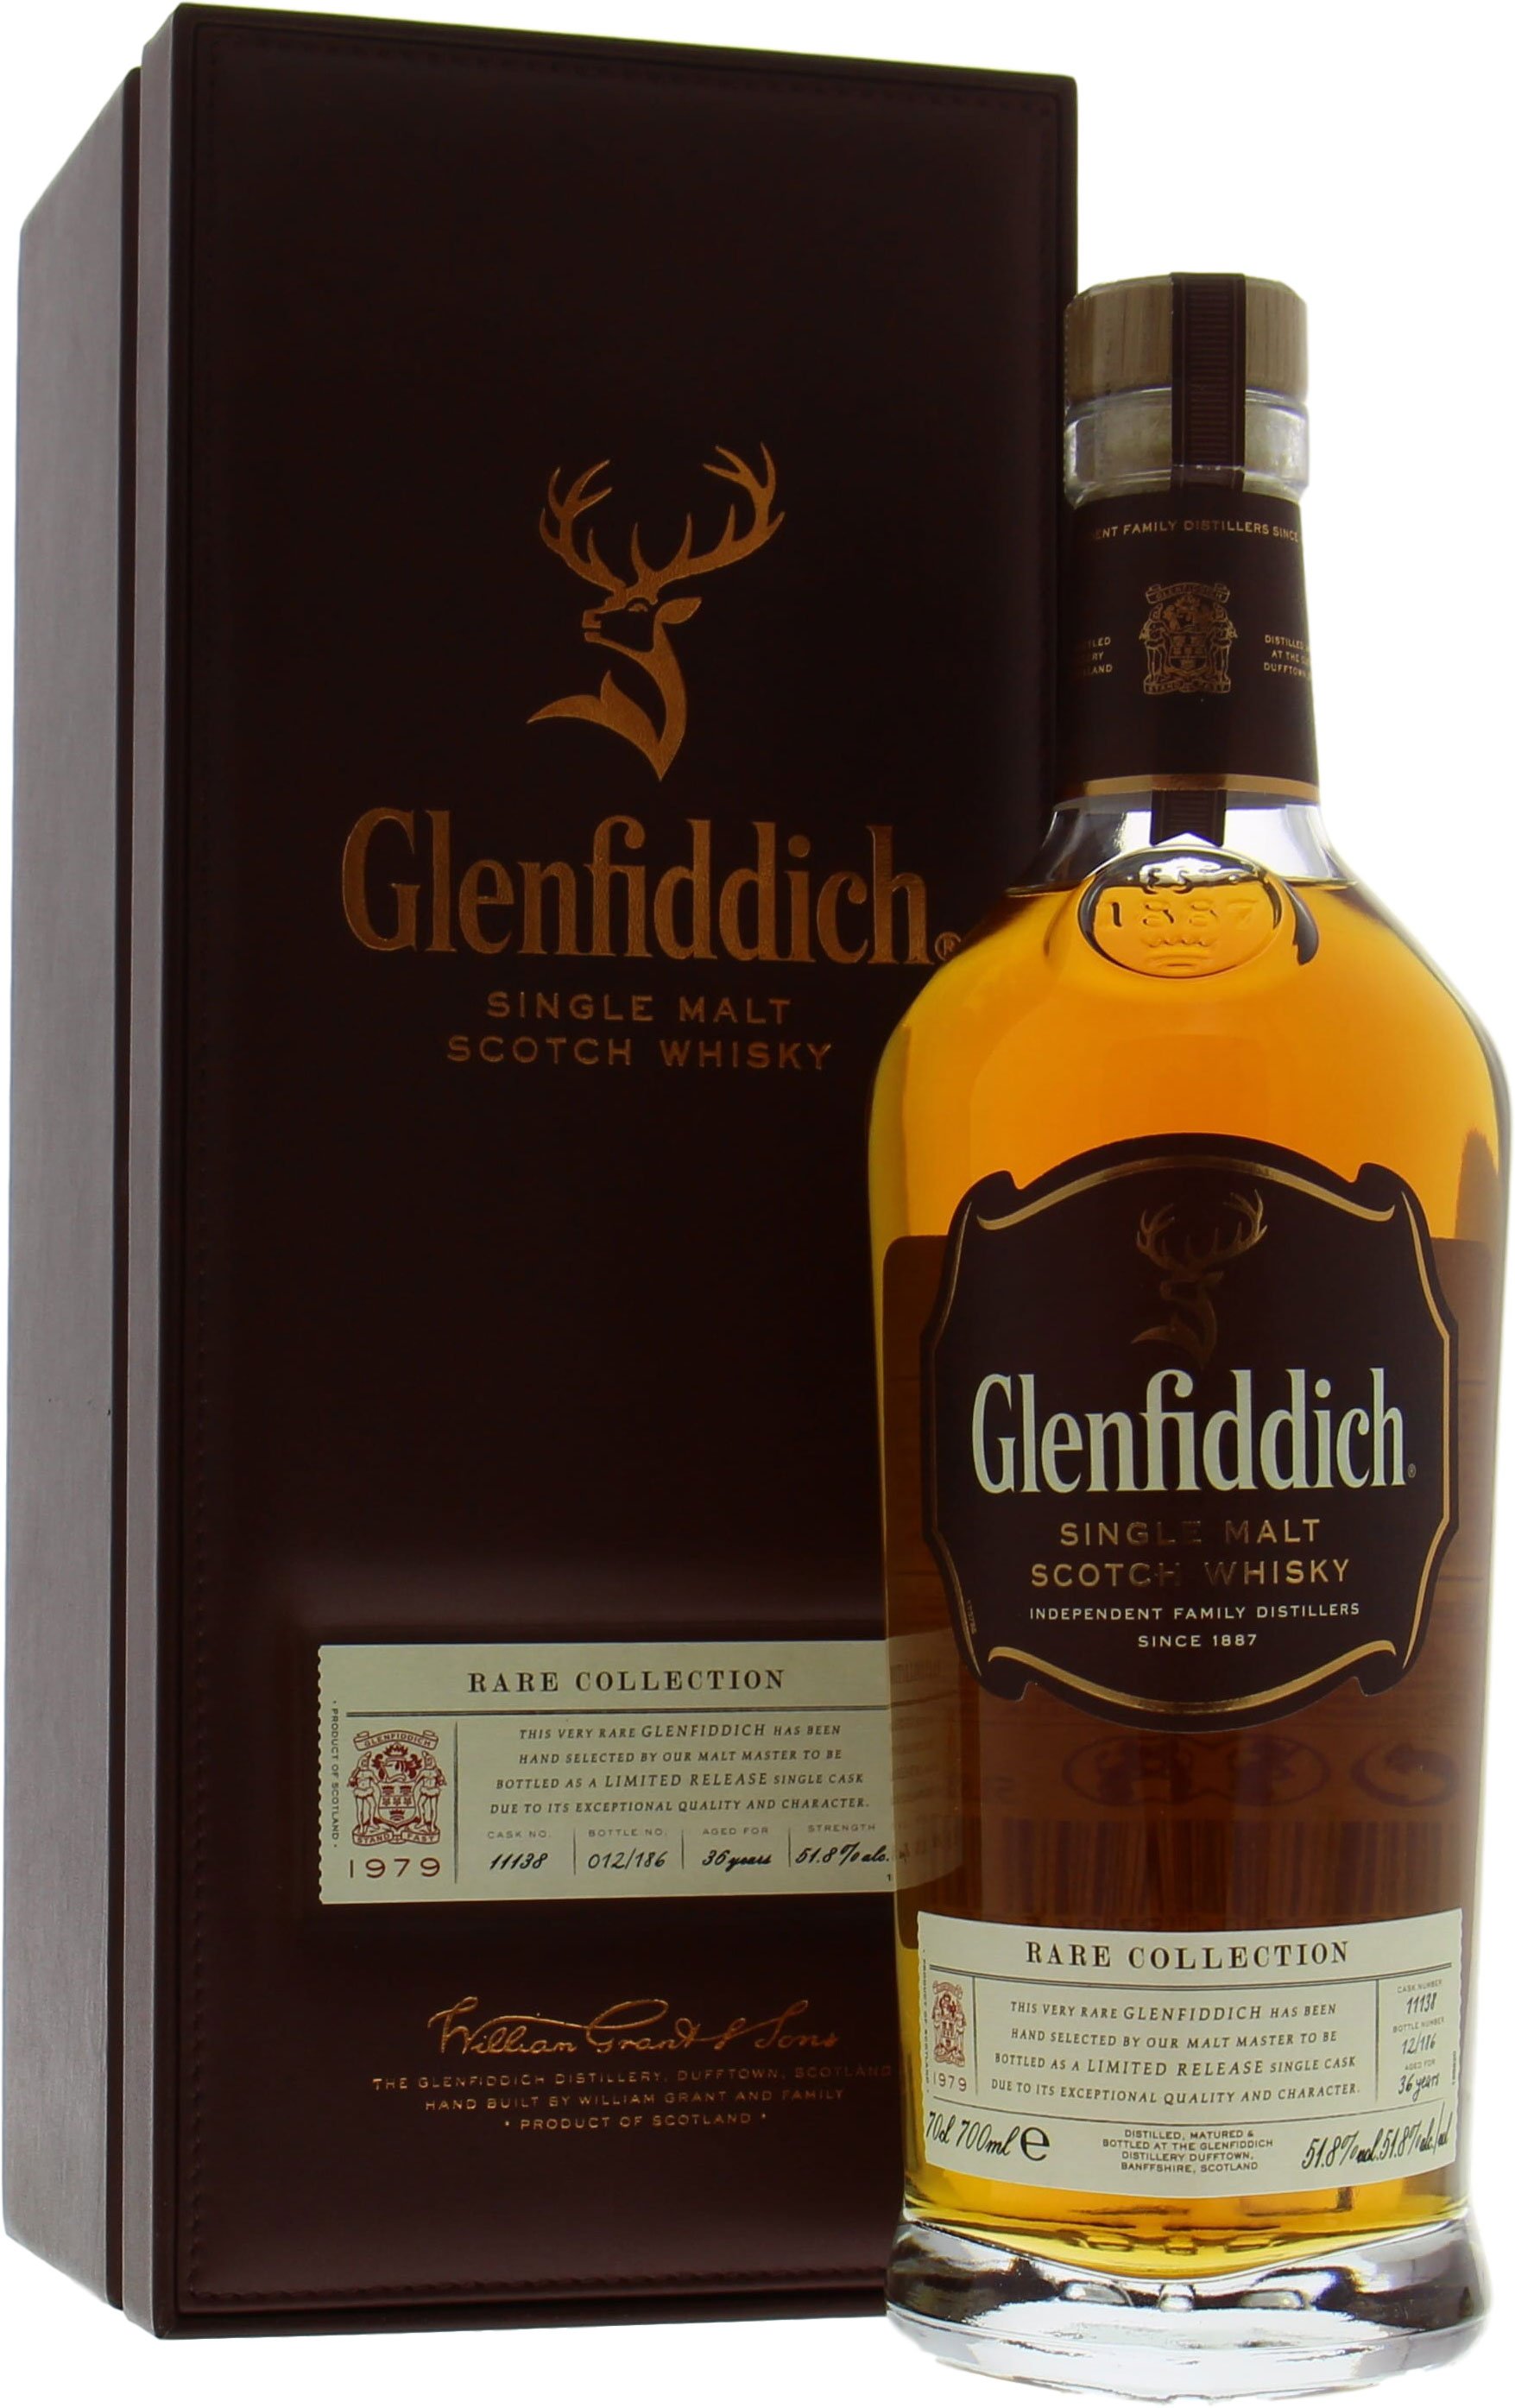 Glenfiddich - Rare Collection 36 Years Old Cask 11138 51.8% 1979 In Original Wooden Case